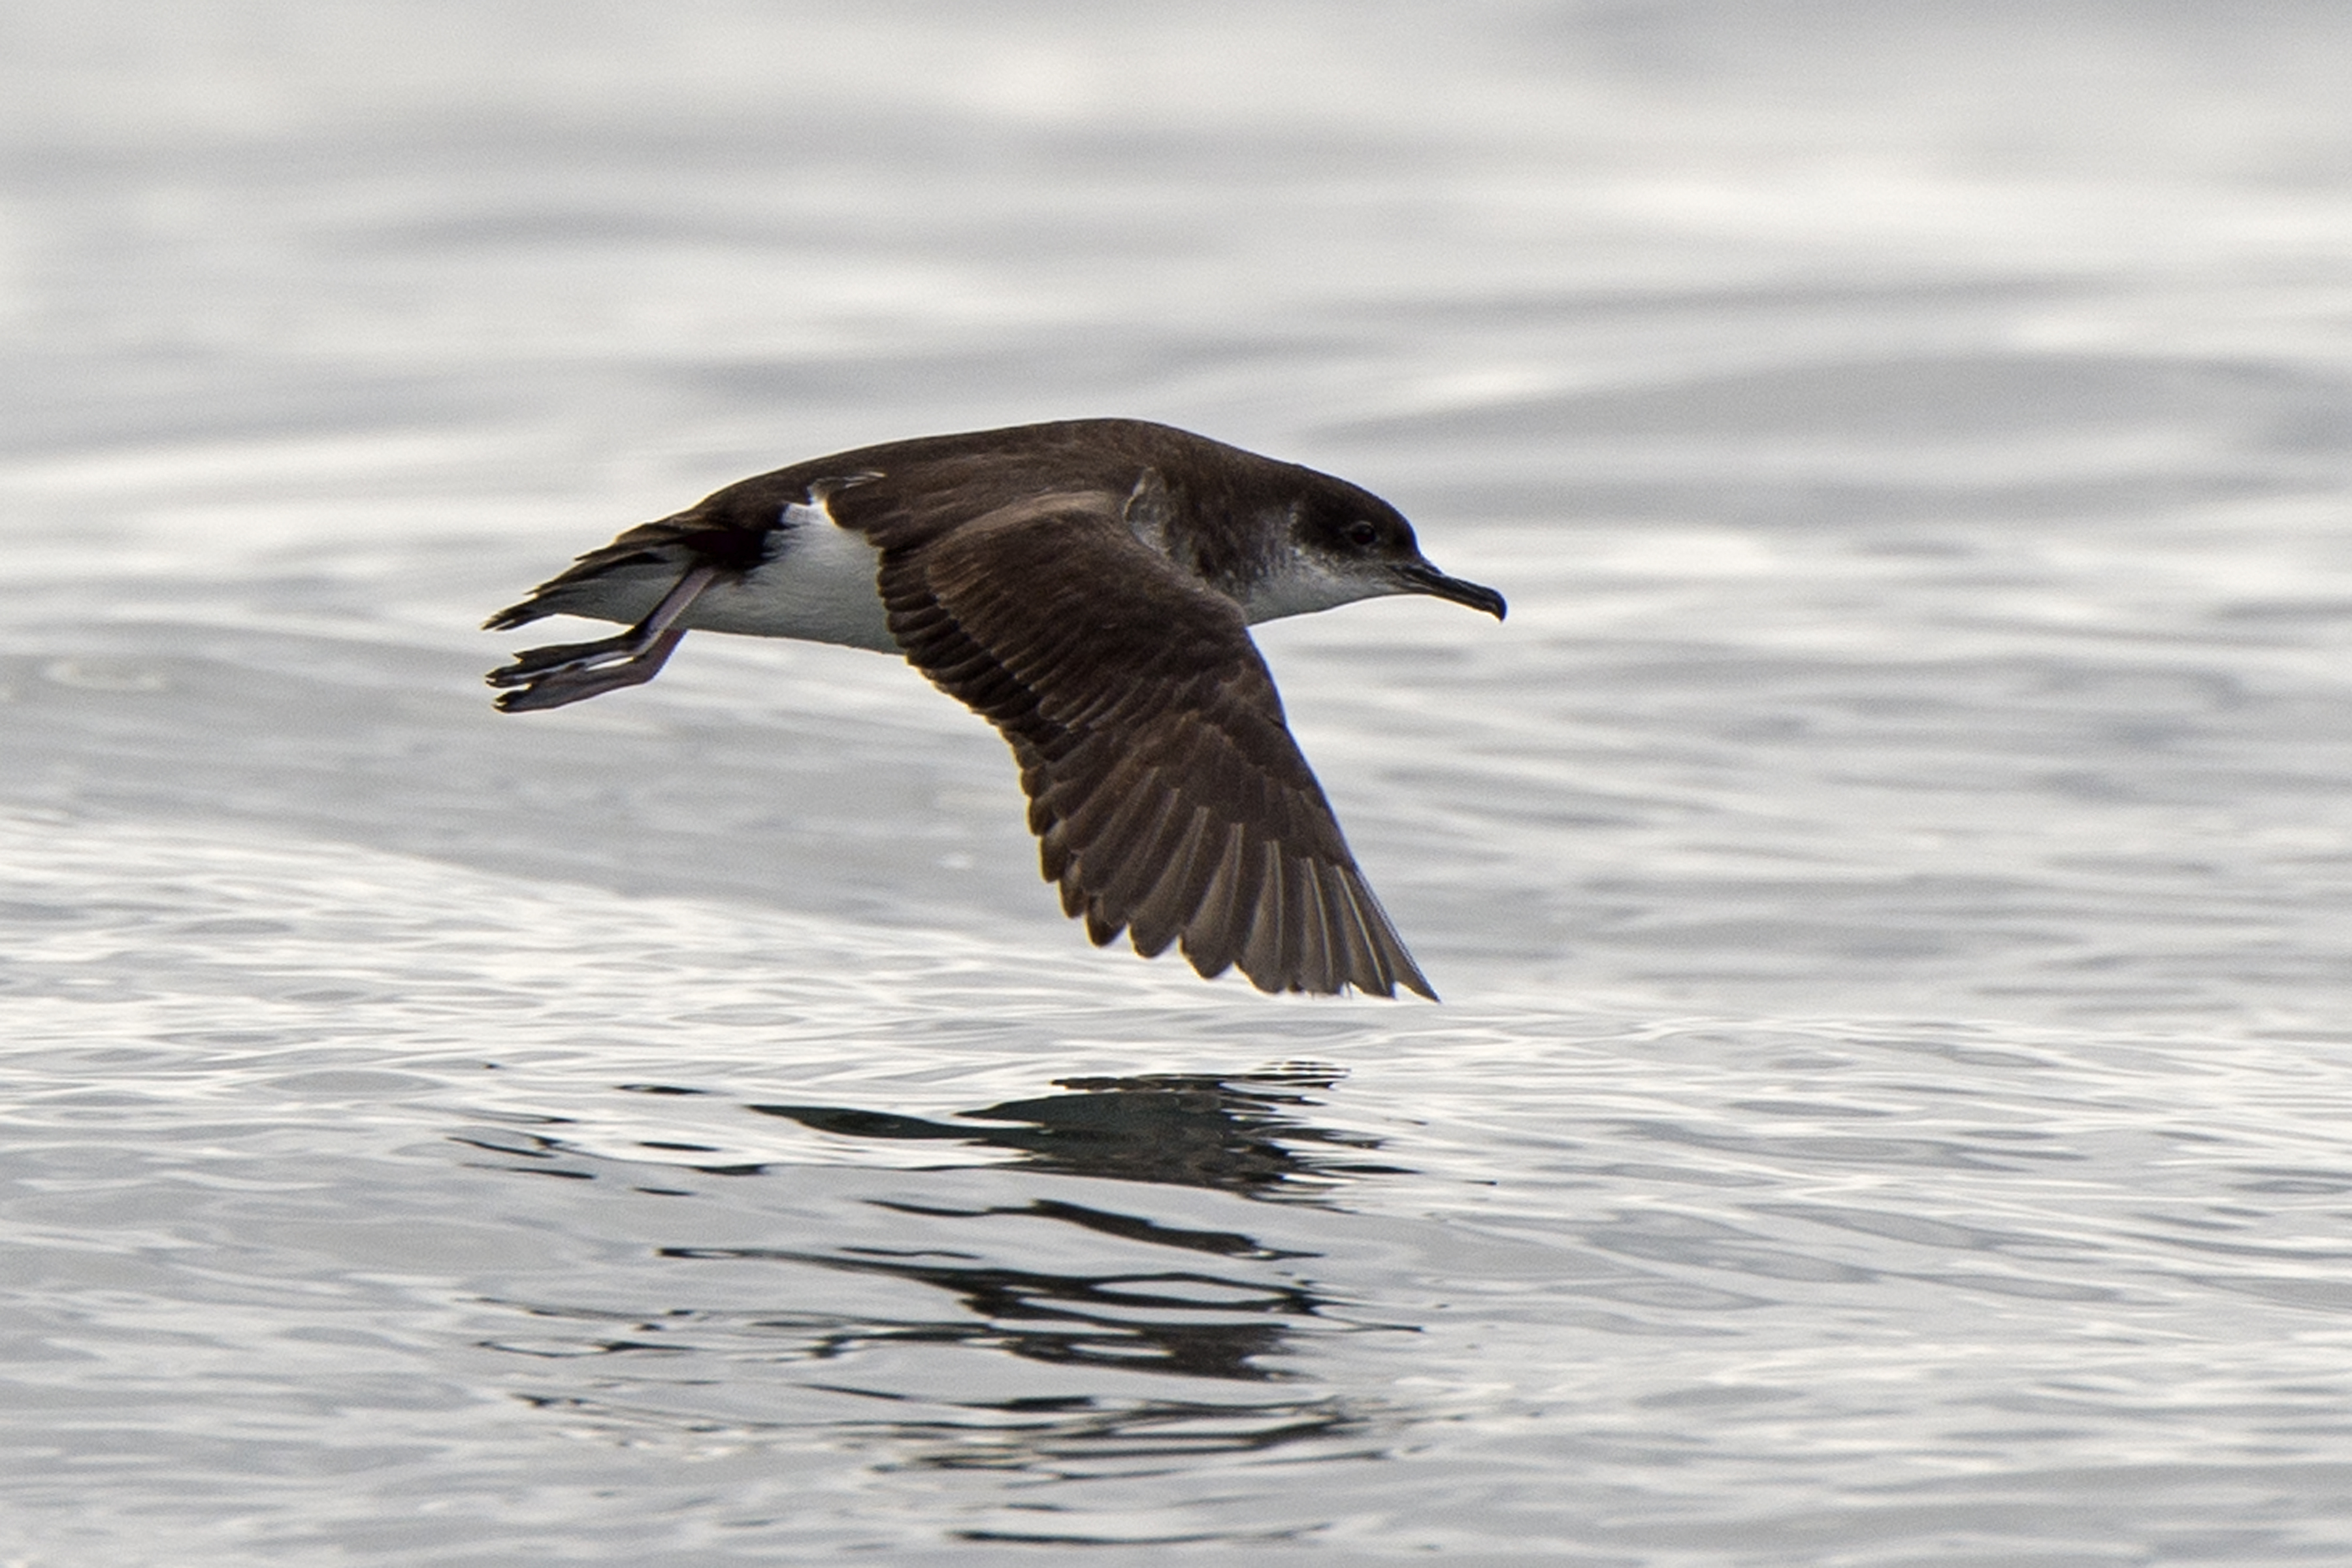 Manx shearwater flying close to surface